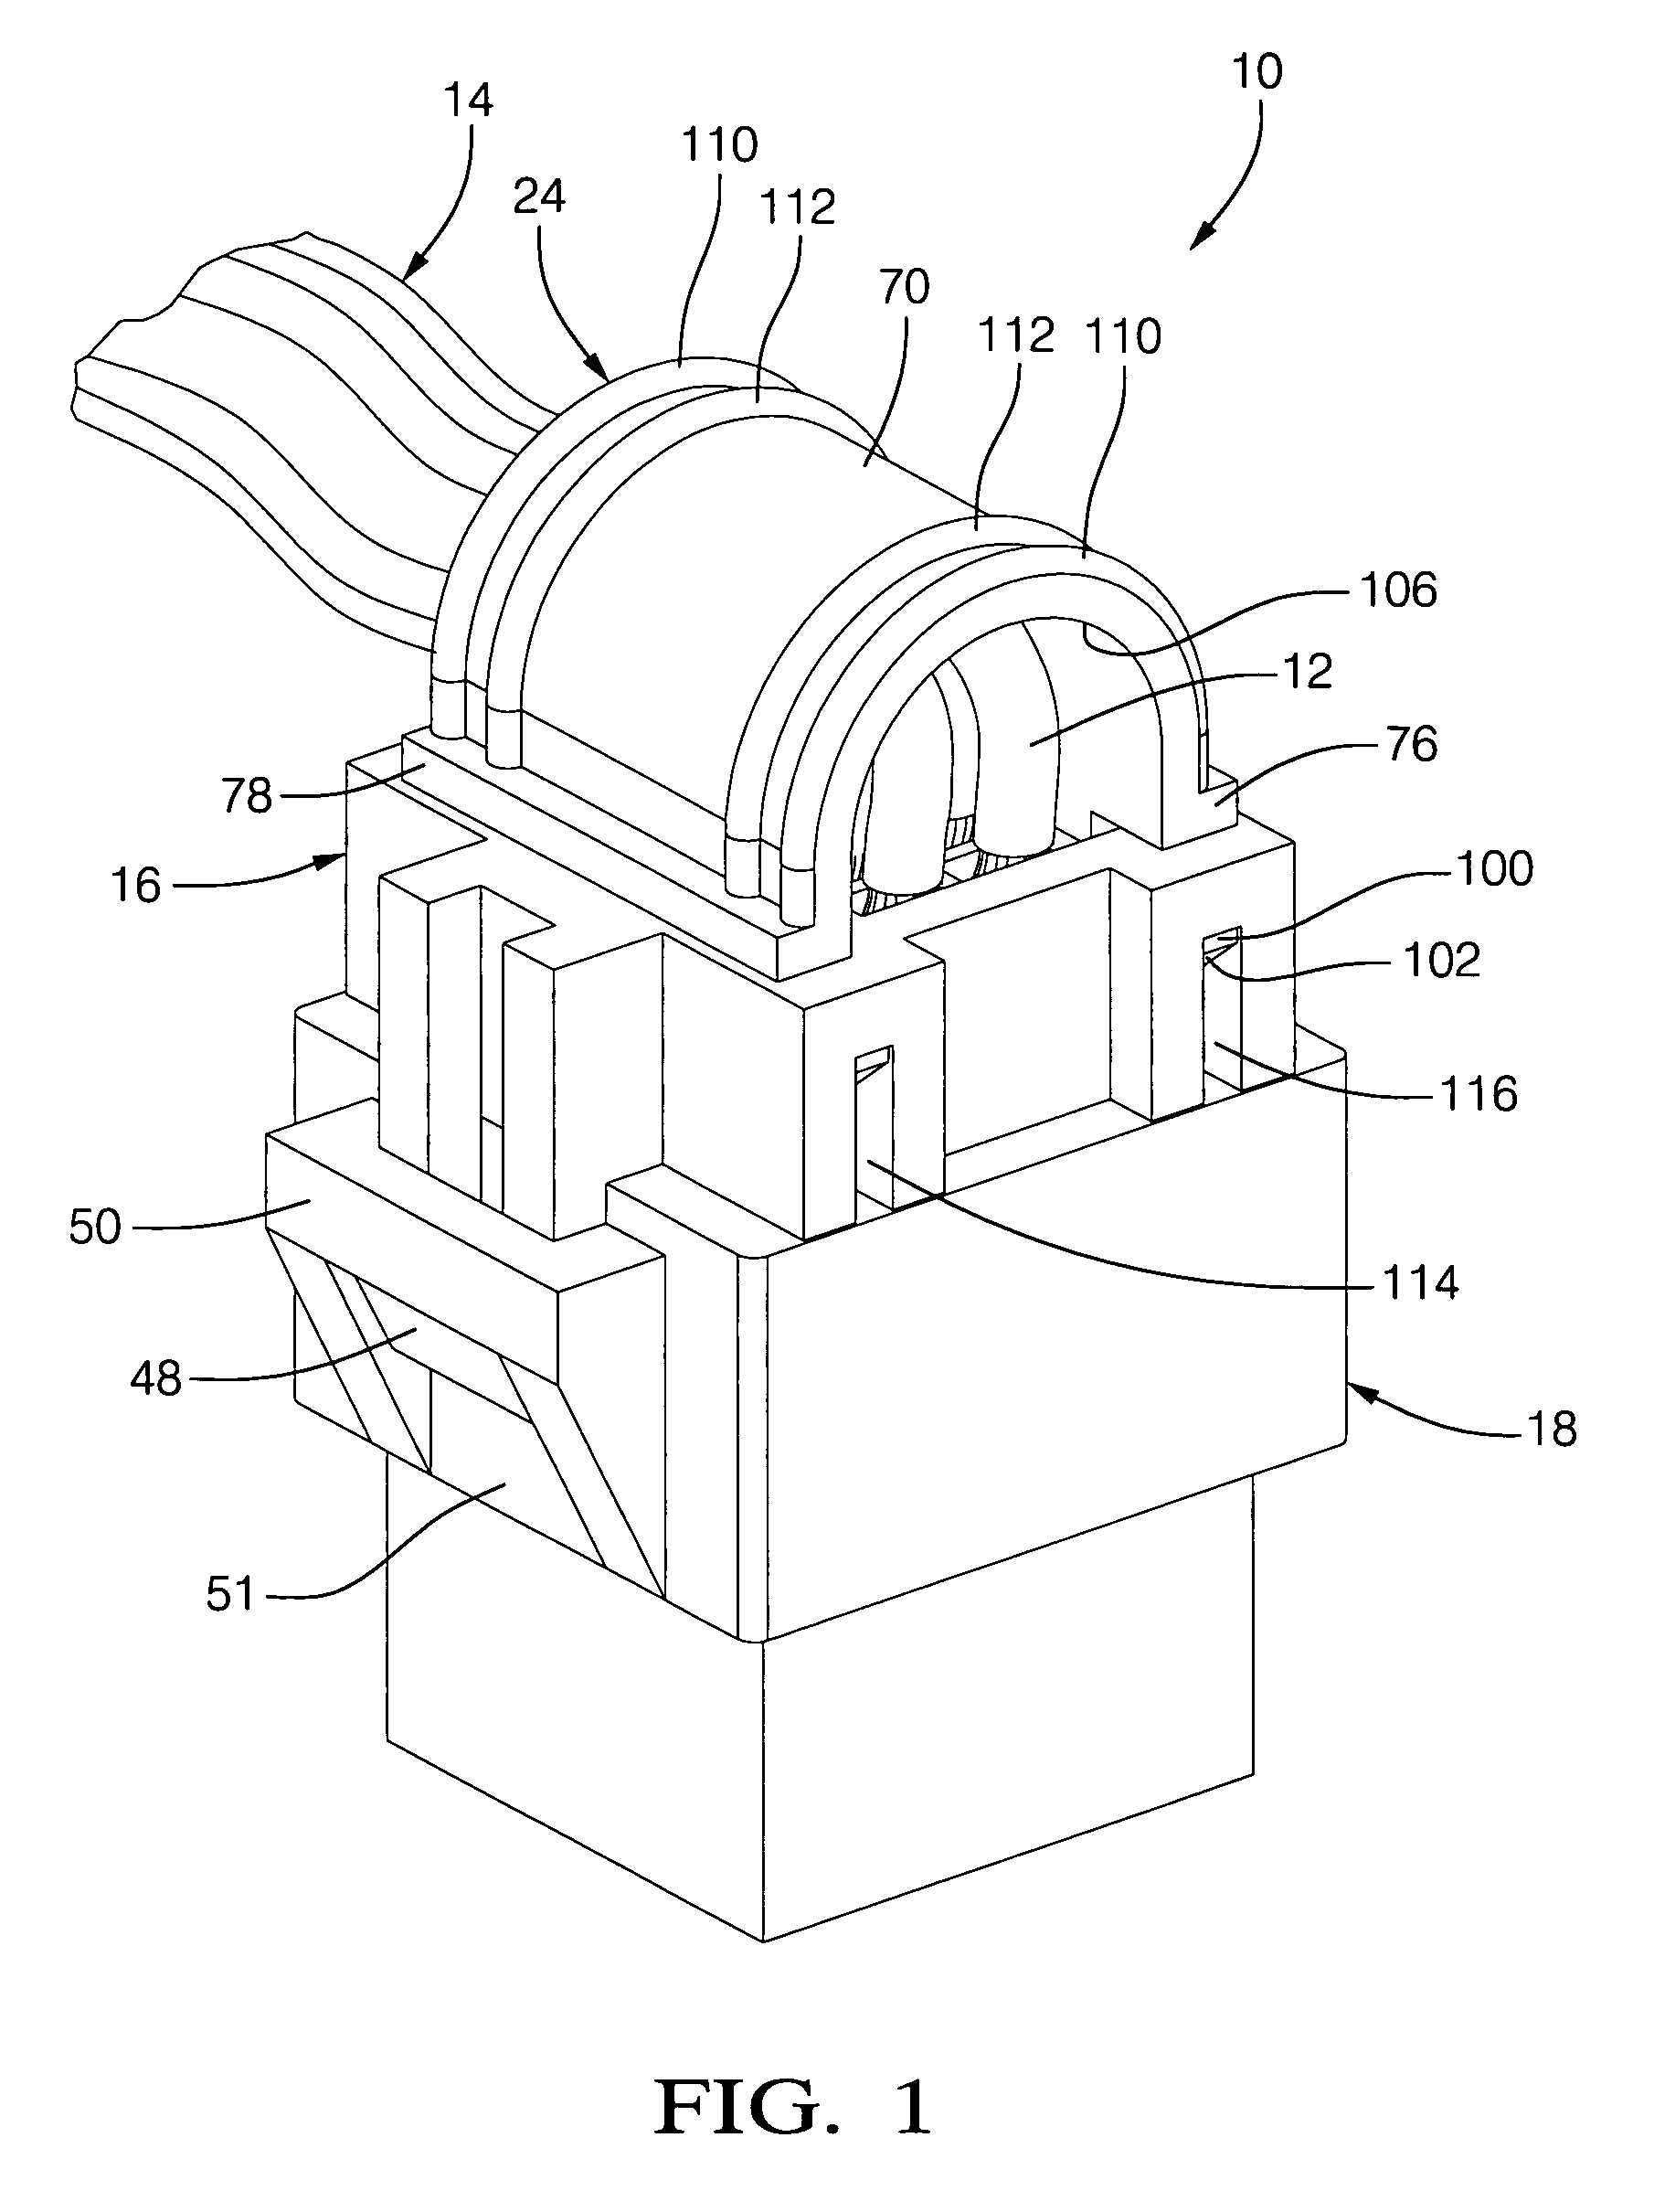 Electrical connector with integrated terminal position assurance and wire cover